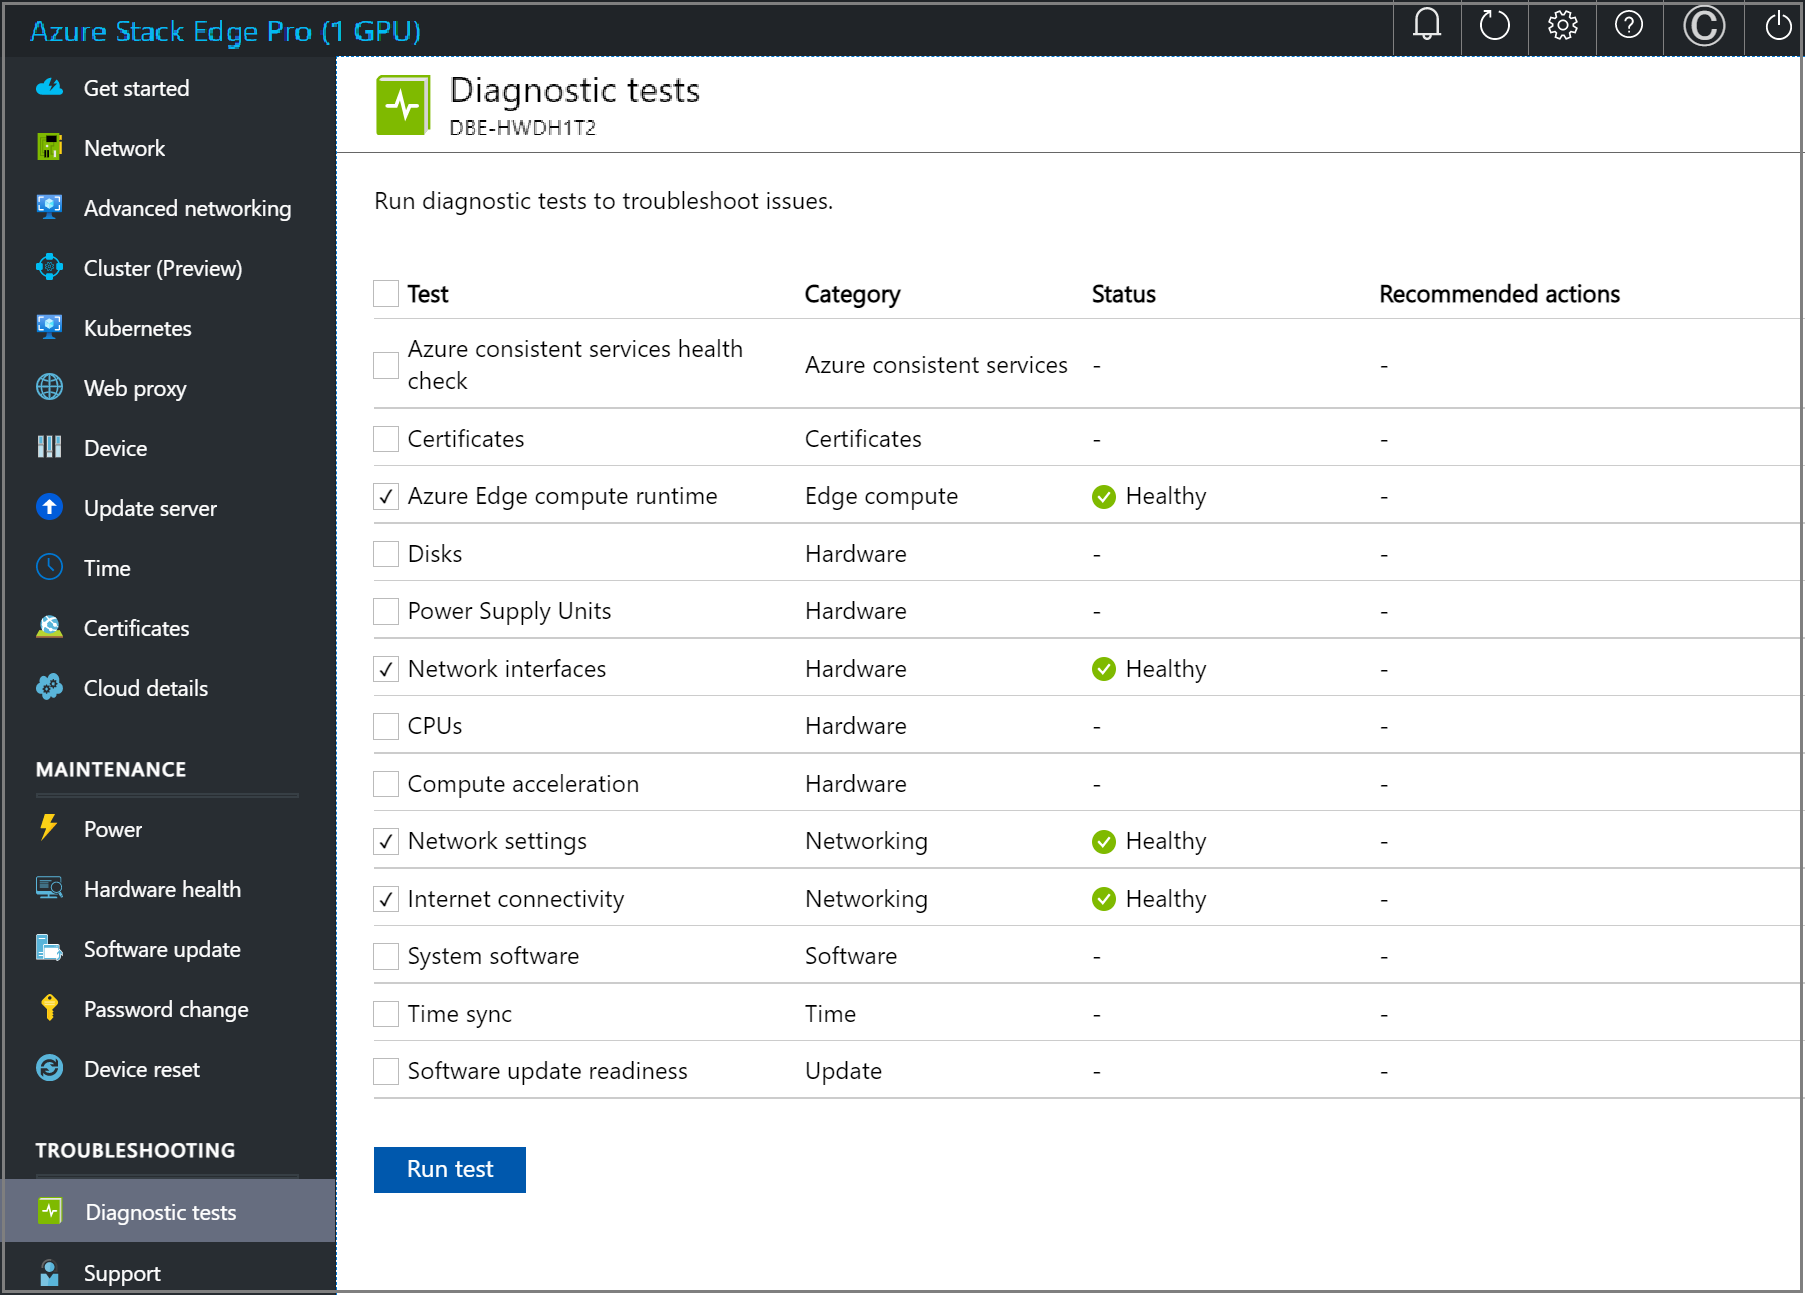 Screenshot of the Diagnostic tests results page in the local web UI of an Azure Stack Edge device.